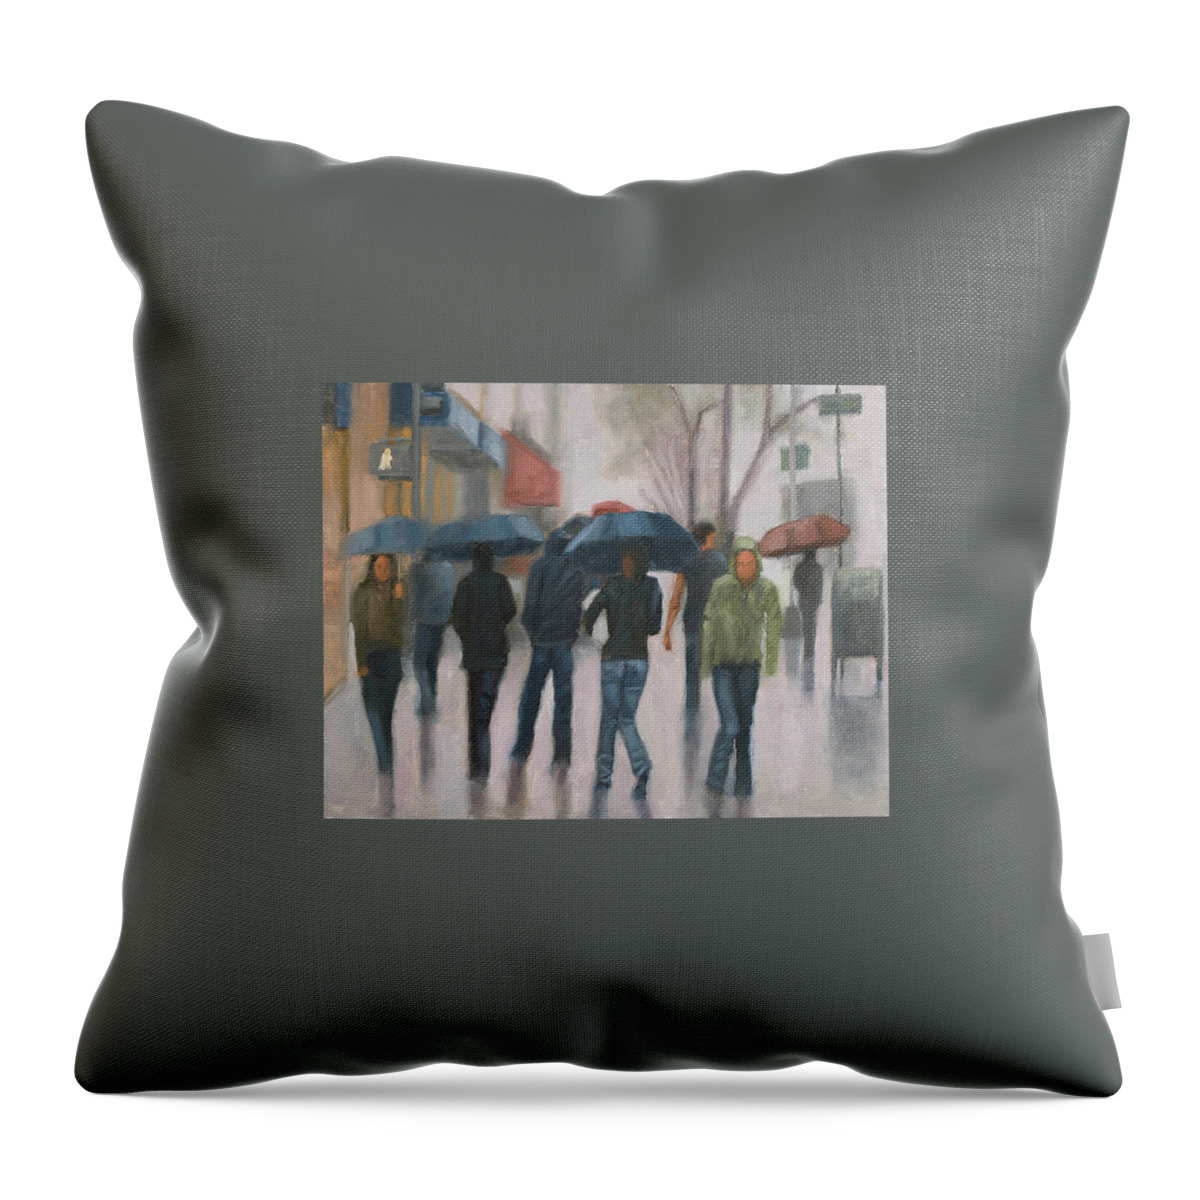 Rain Throw Pillow featuring the painting Wash Out by Tate Hamilton